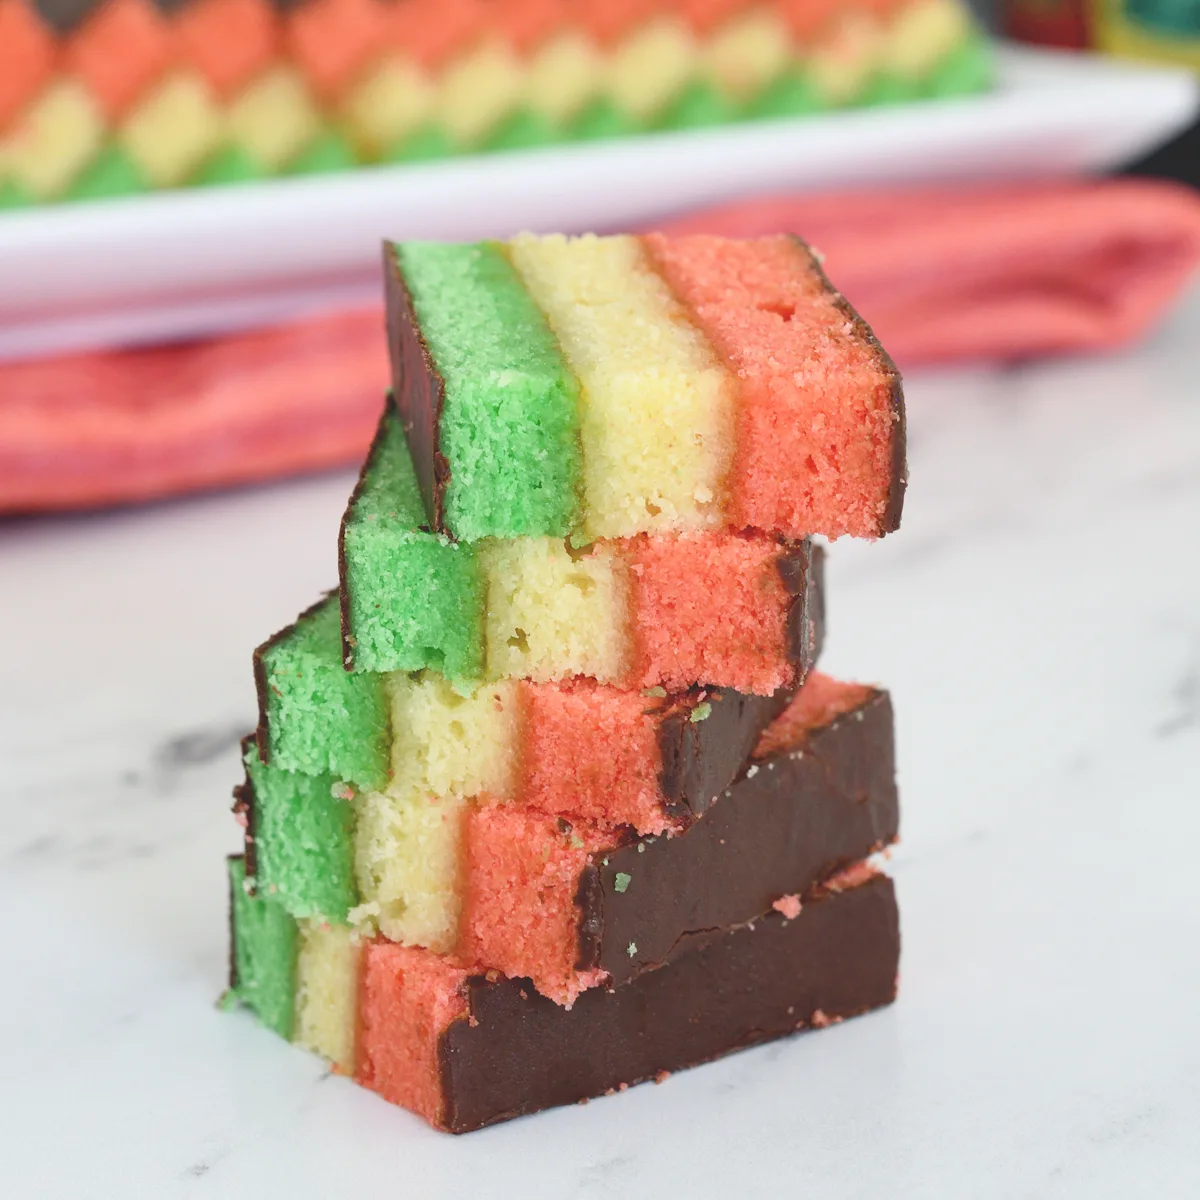 My Kitchen Snippets: Tri-color Marble Cake